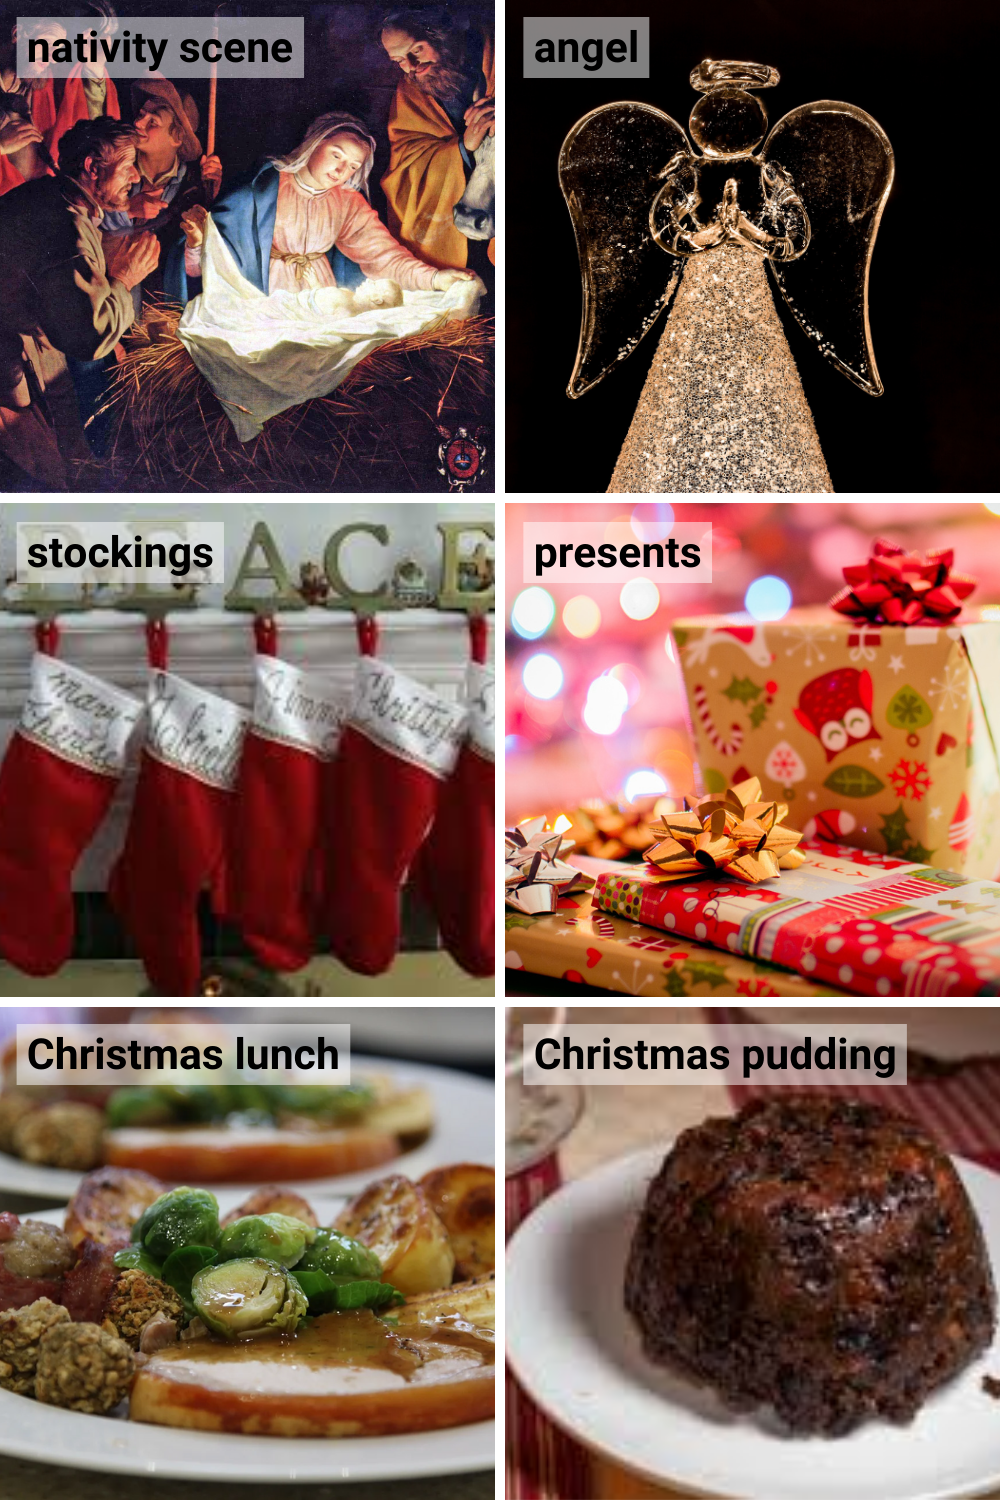 Picture dictionary showing nativity scene, angel, stockings, presents, Christmas lunch and Christmas pudding